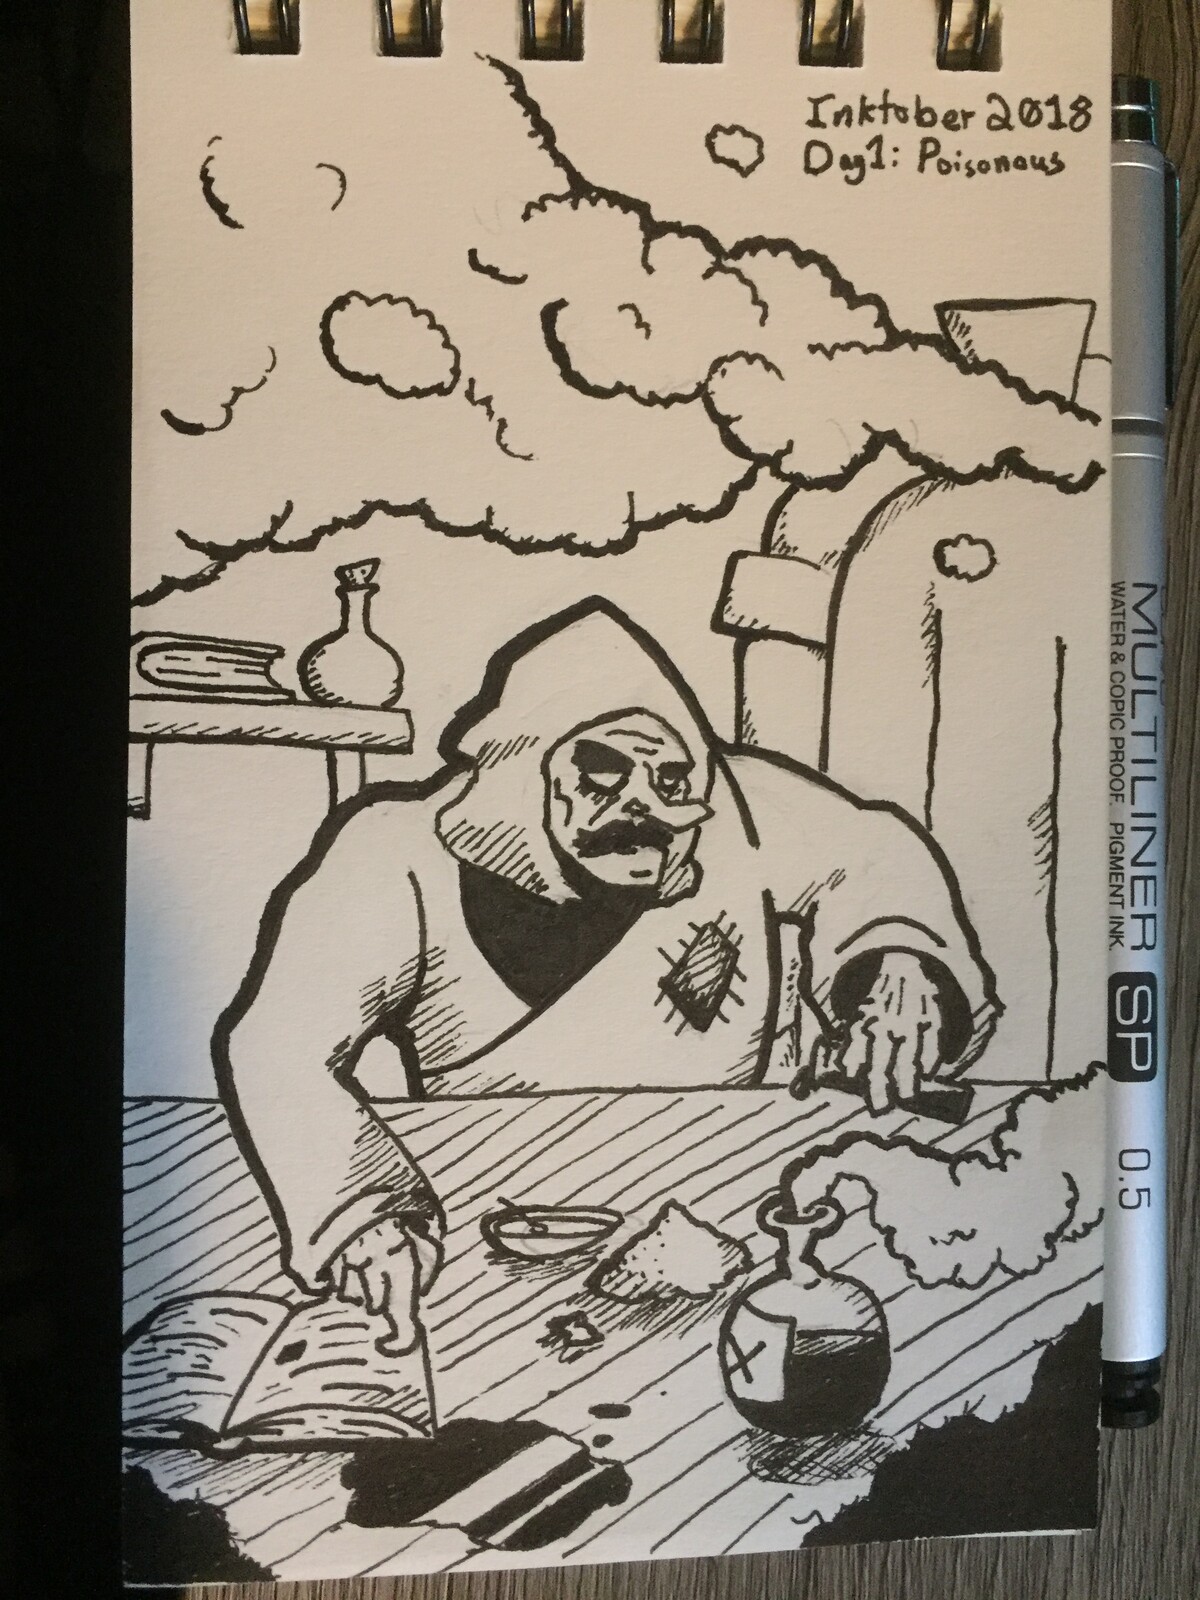 Day 1: Poisonous